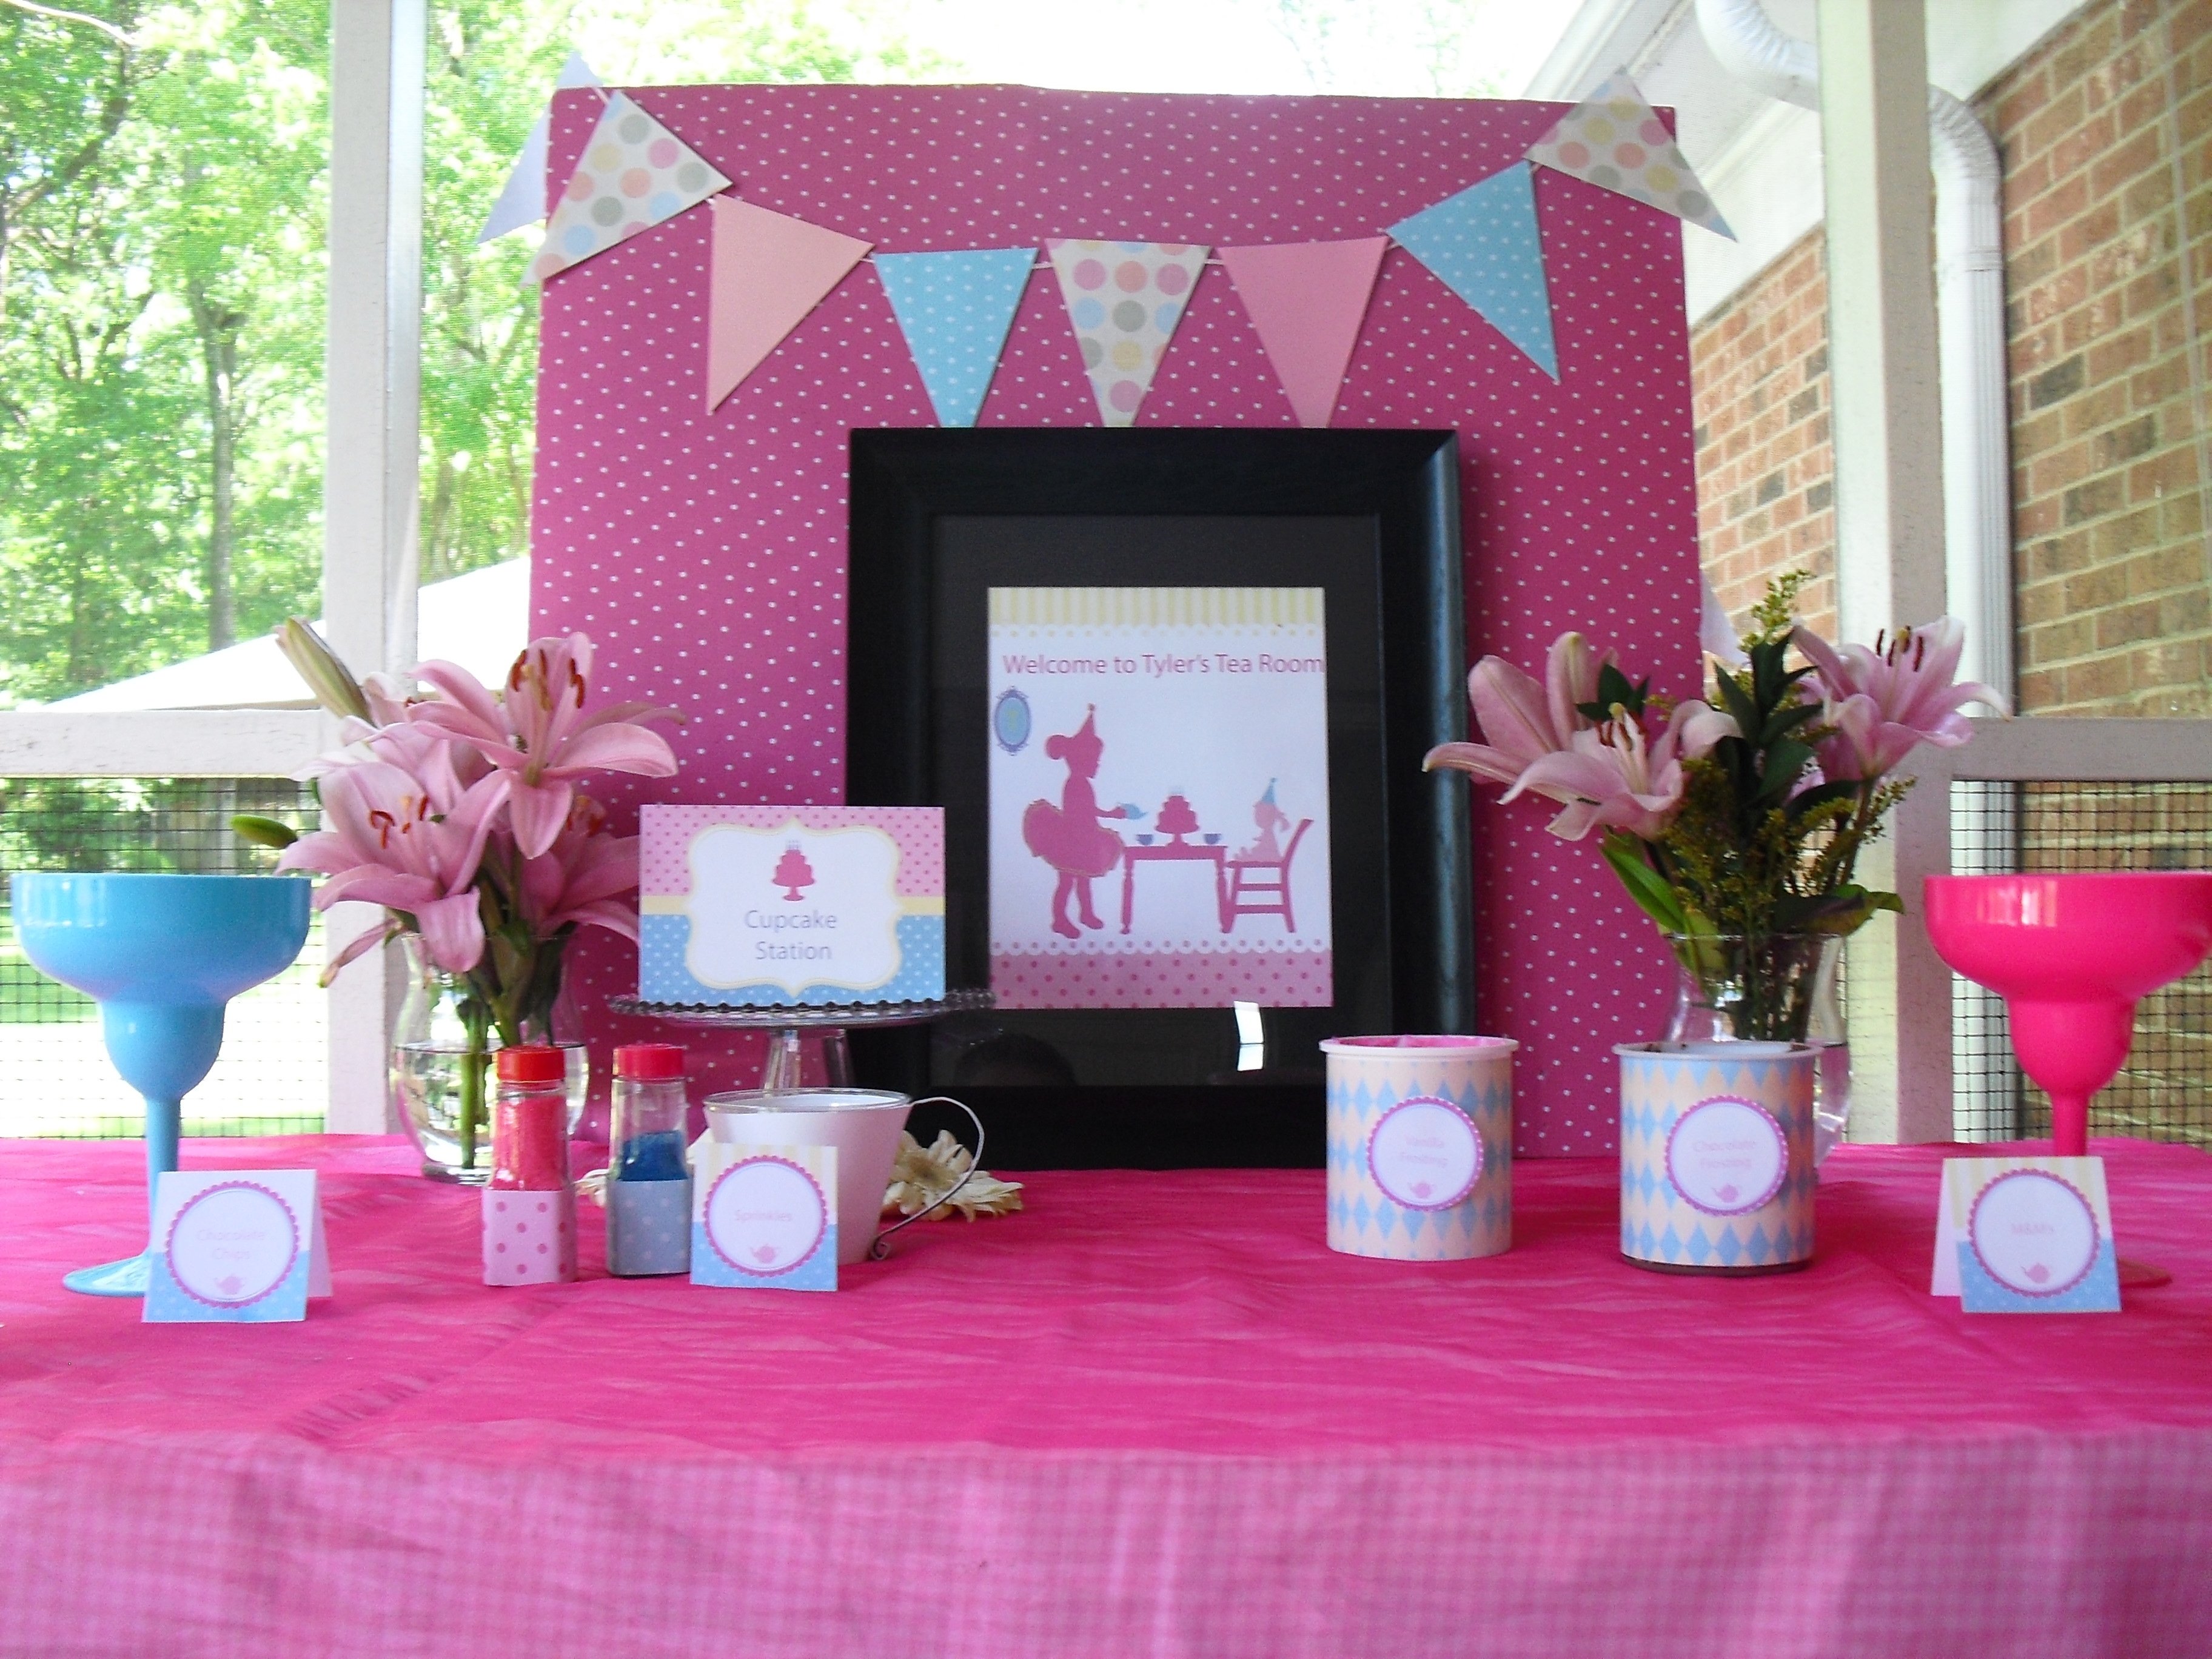 10 Famous 3 Year Old Girl Birthday Party Ideas a tea party with baby dolls and tutus anders ruff custom designs llc 2022